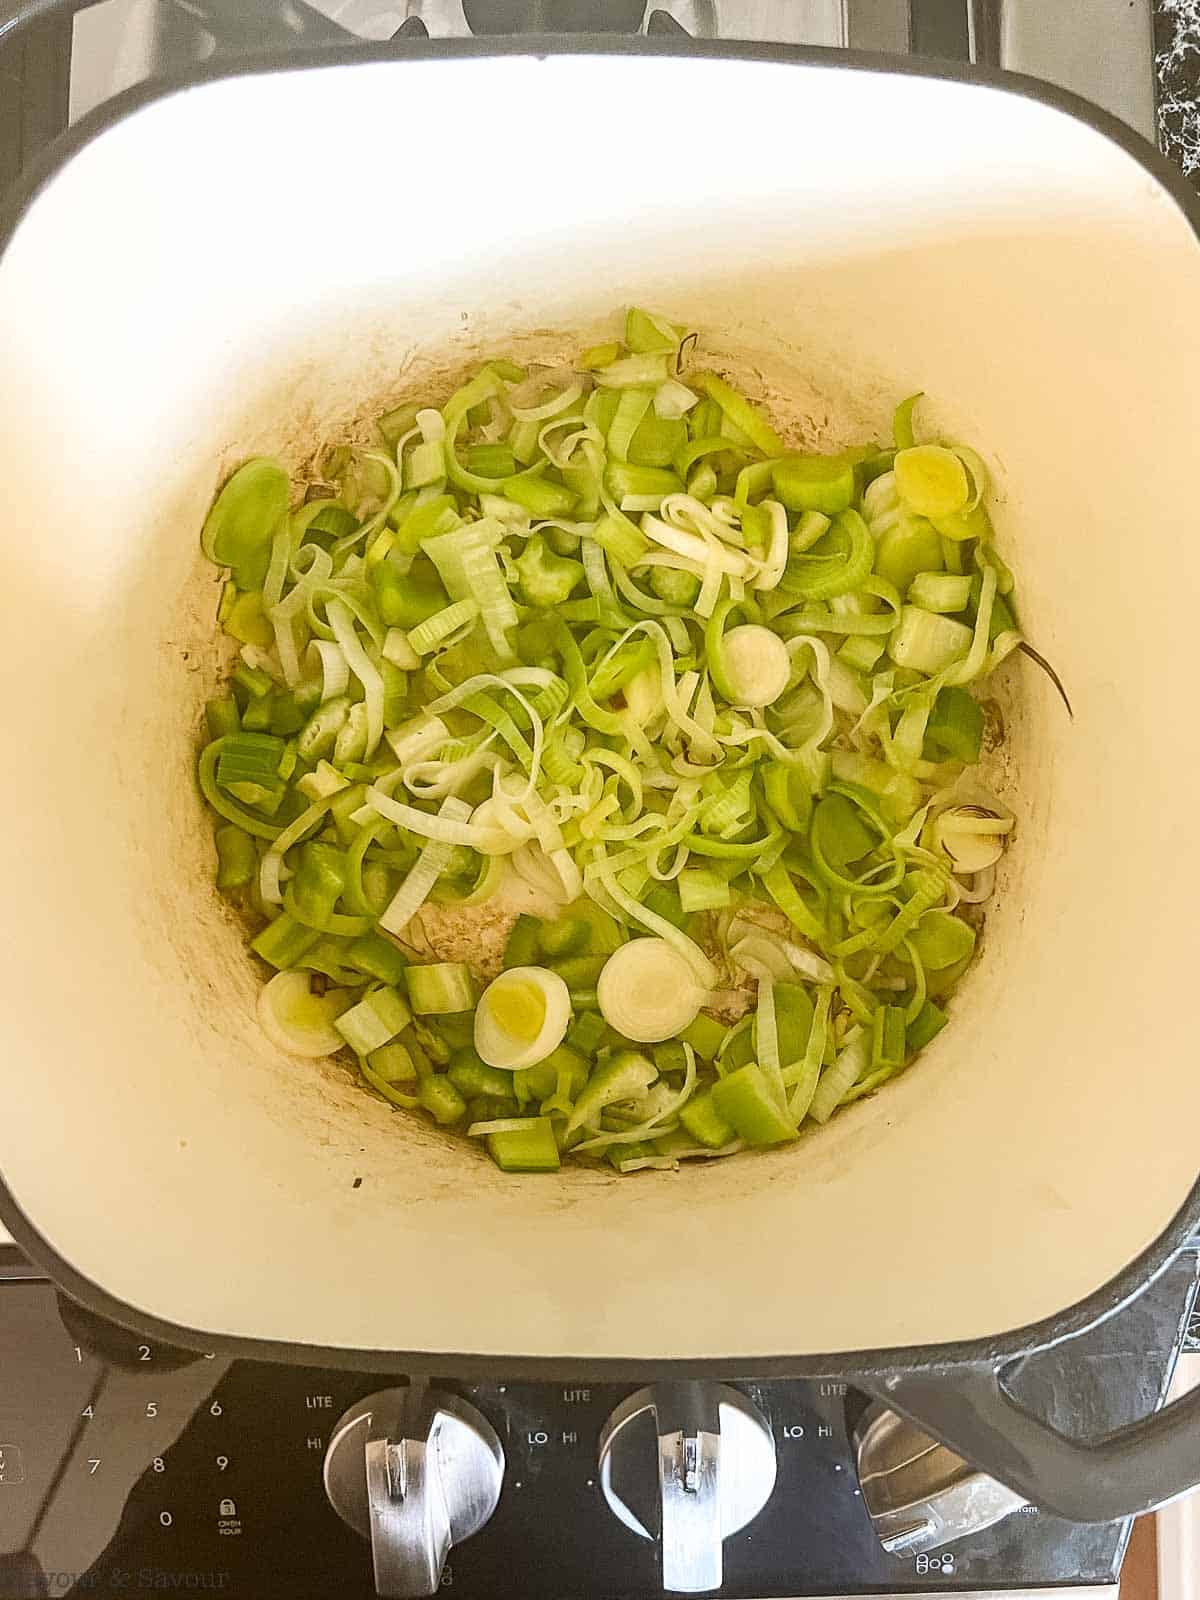 Sautéing leeks and celery in a pot on the stovetop.